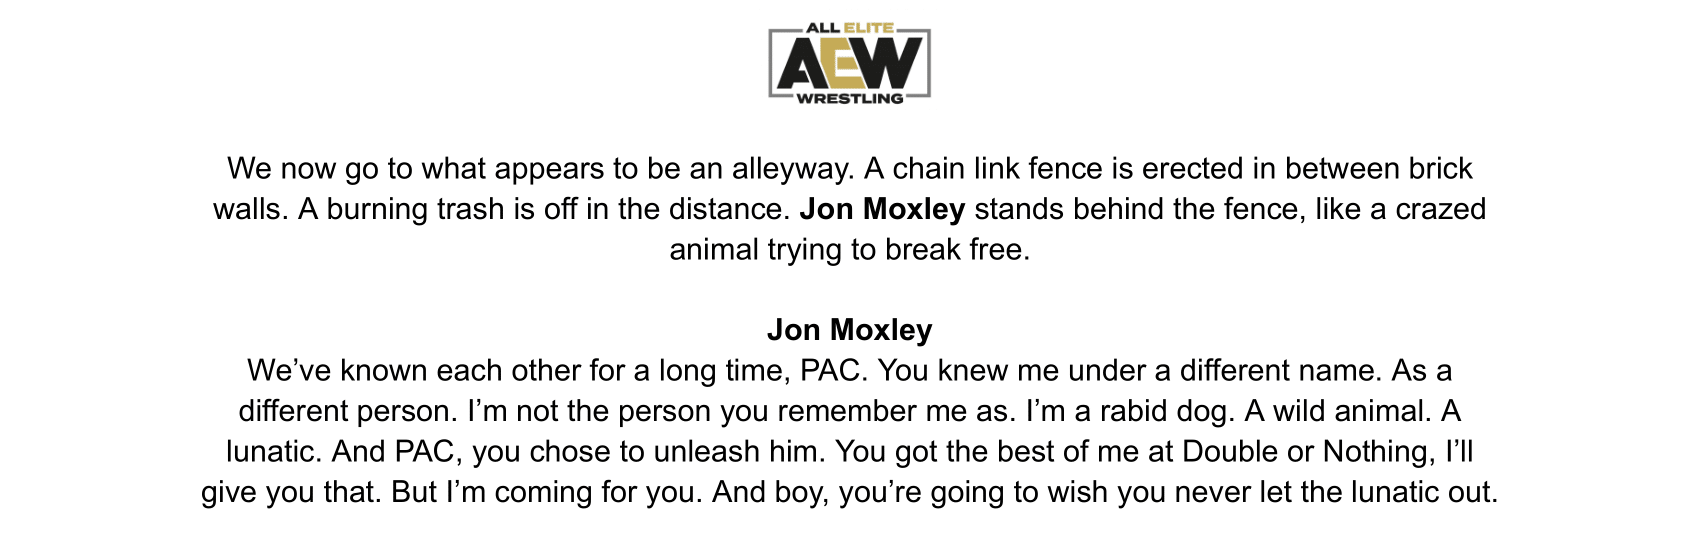 Jon Moxley Promo.png